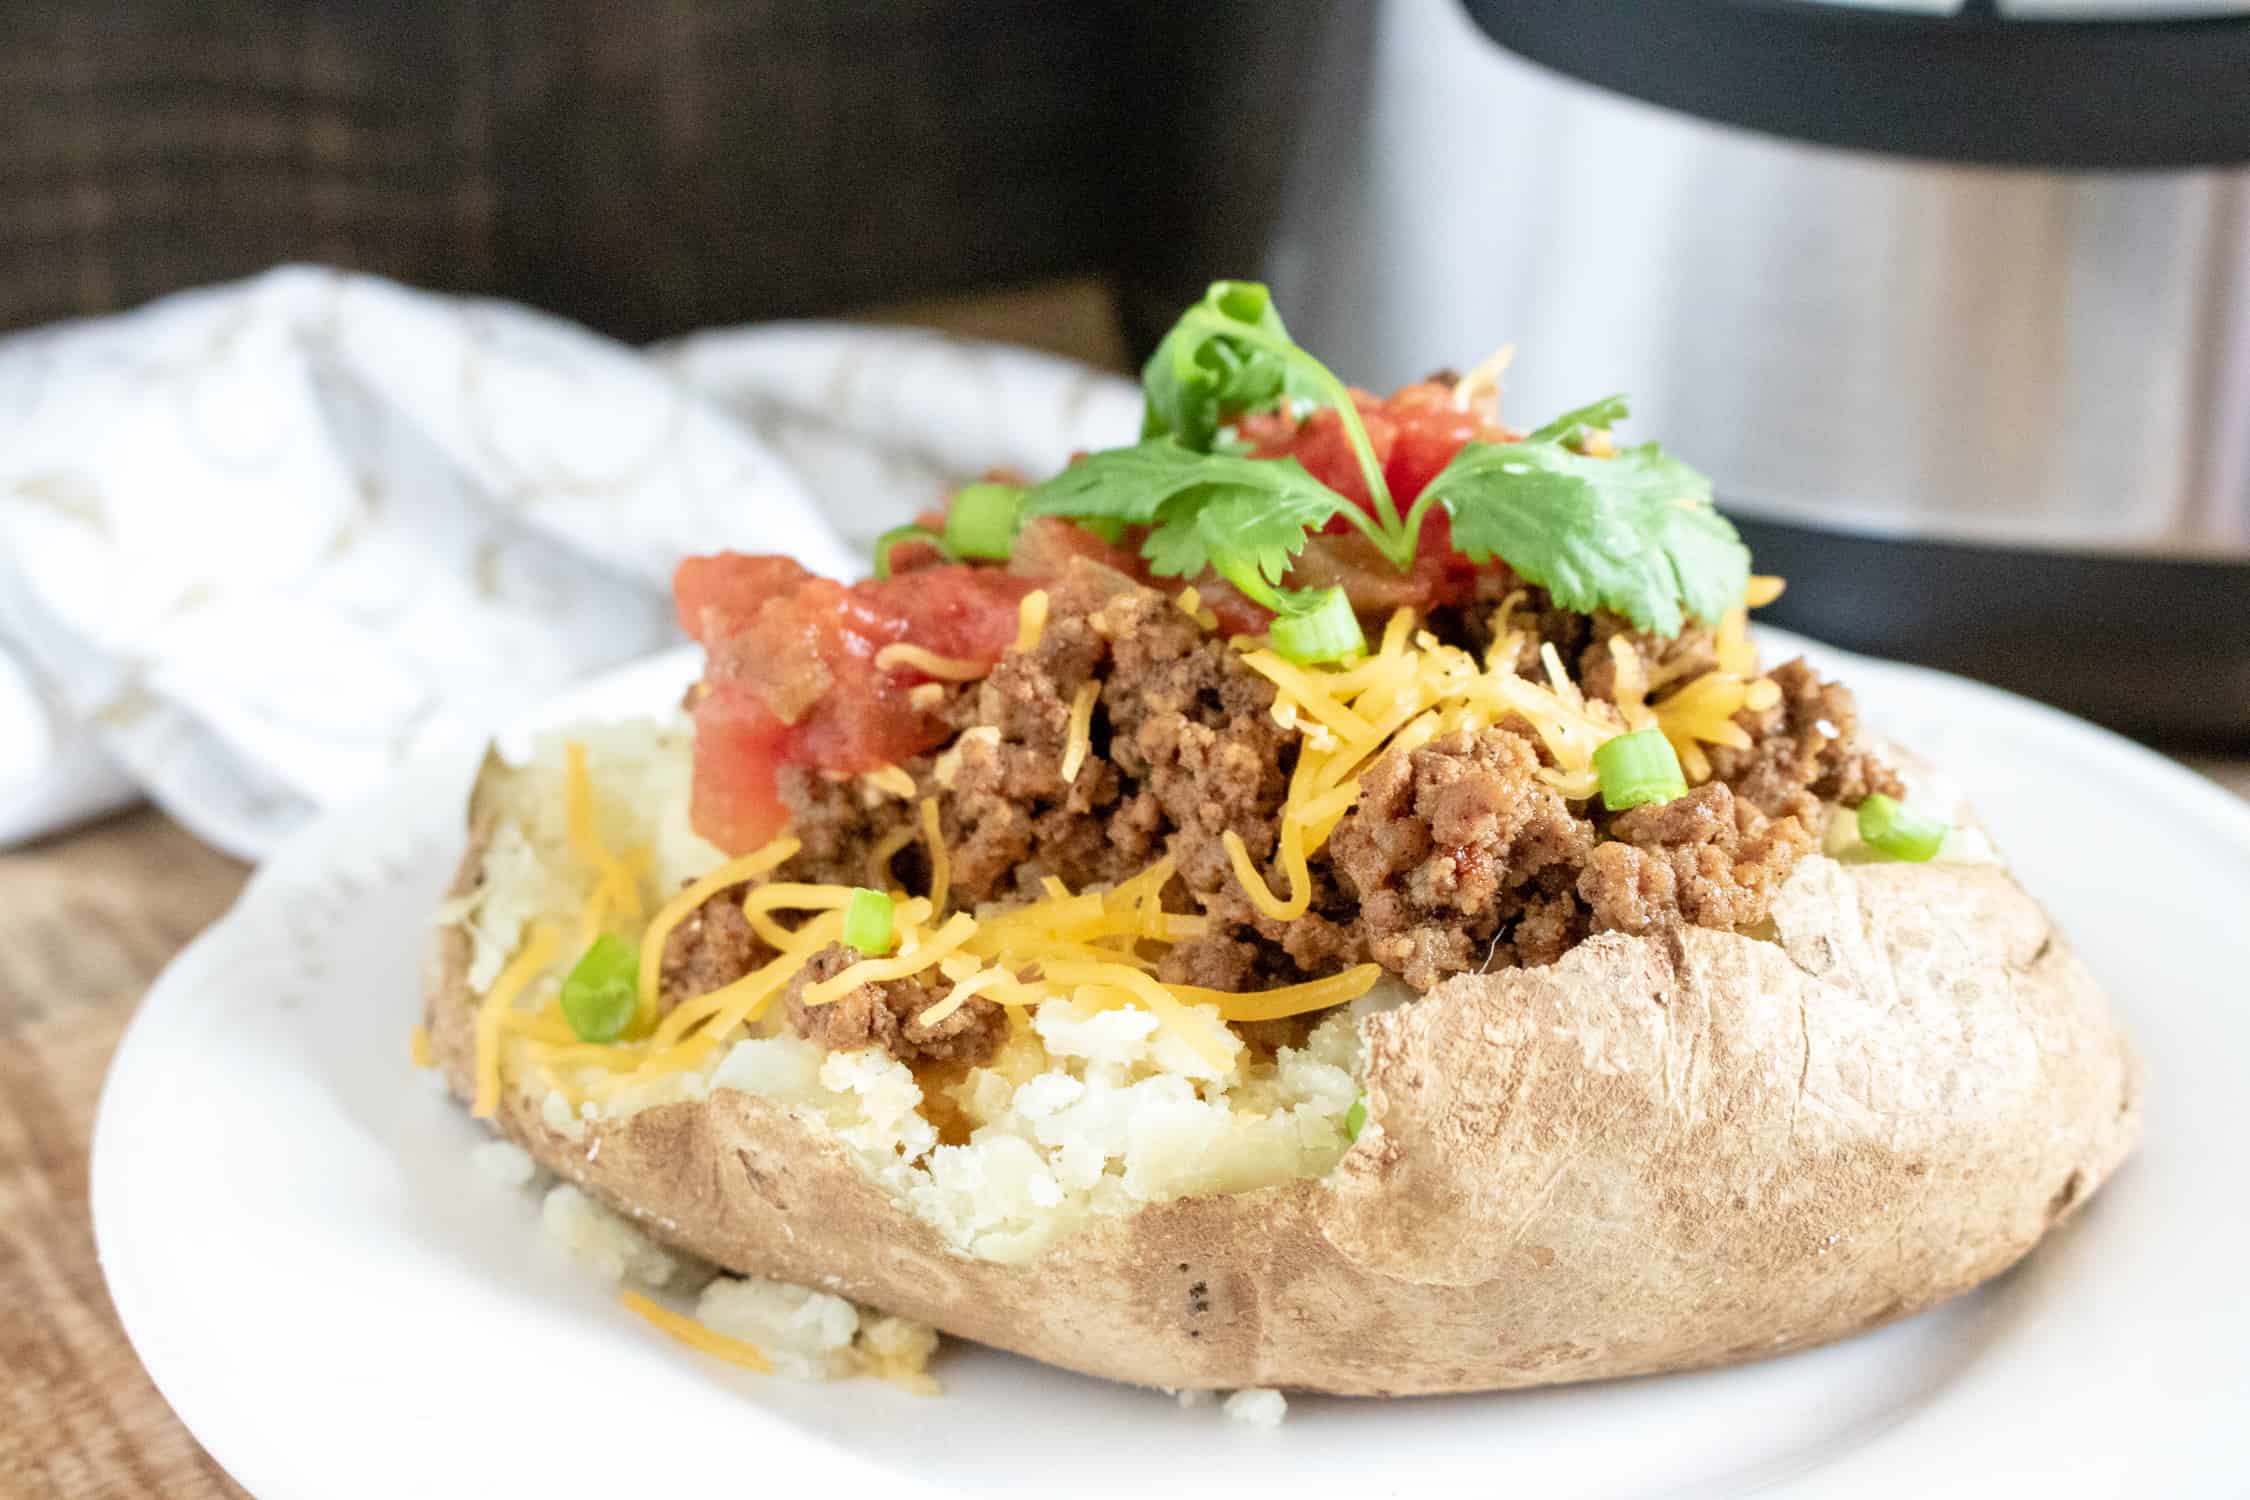 Instant Pot Taco Meat on a baked potato topped with cheese, cilantro and tomatoes 